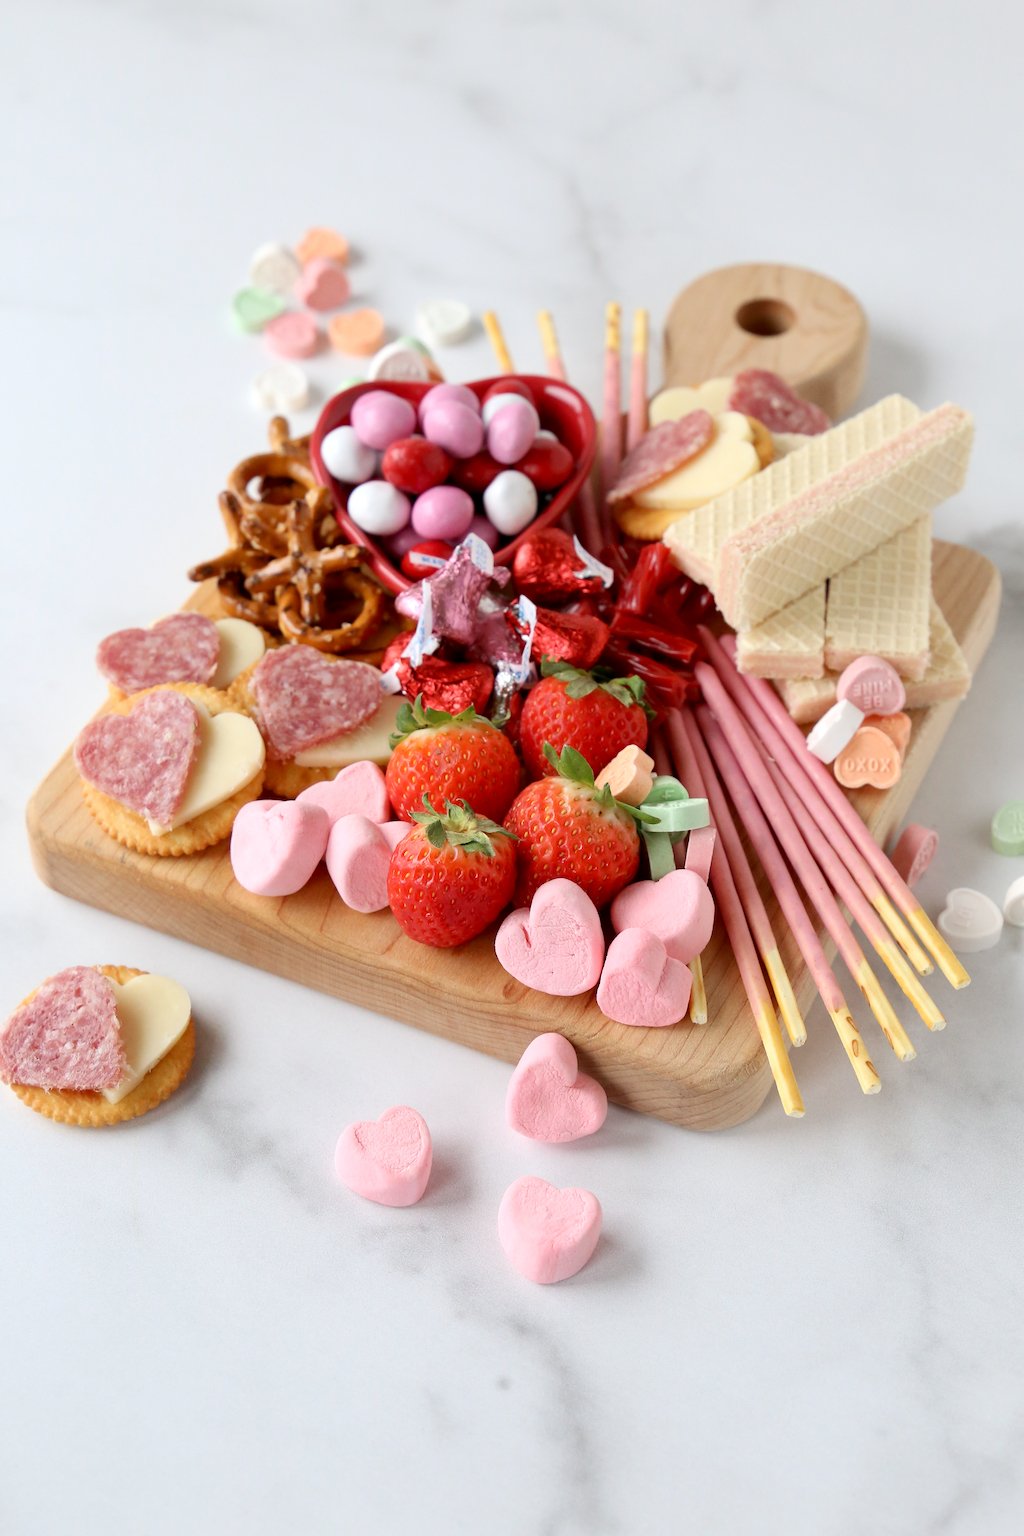 a wood cutting board filling with chocolate, marshmallows, strawberries, wafer cookies and salami and cheese crackers 